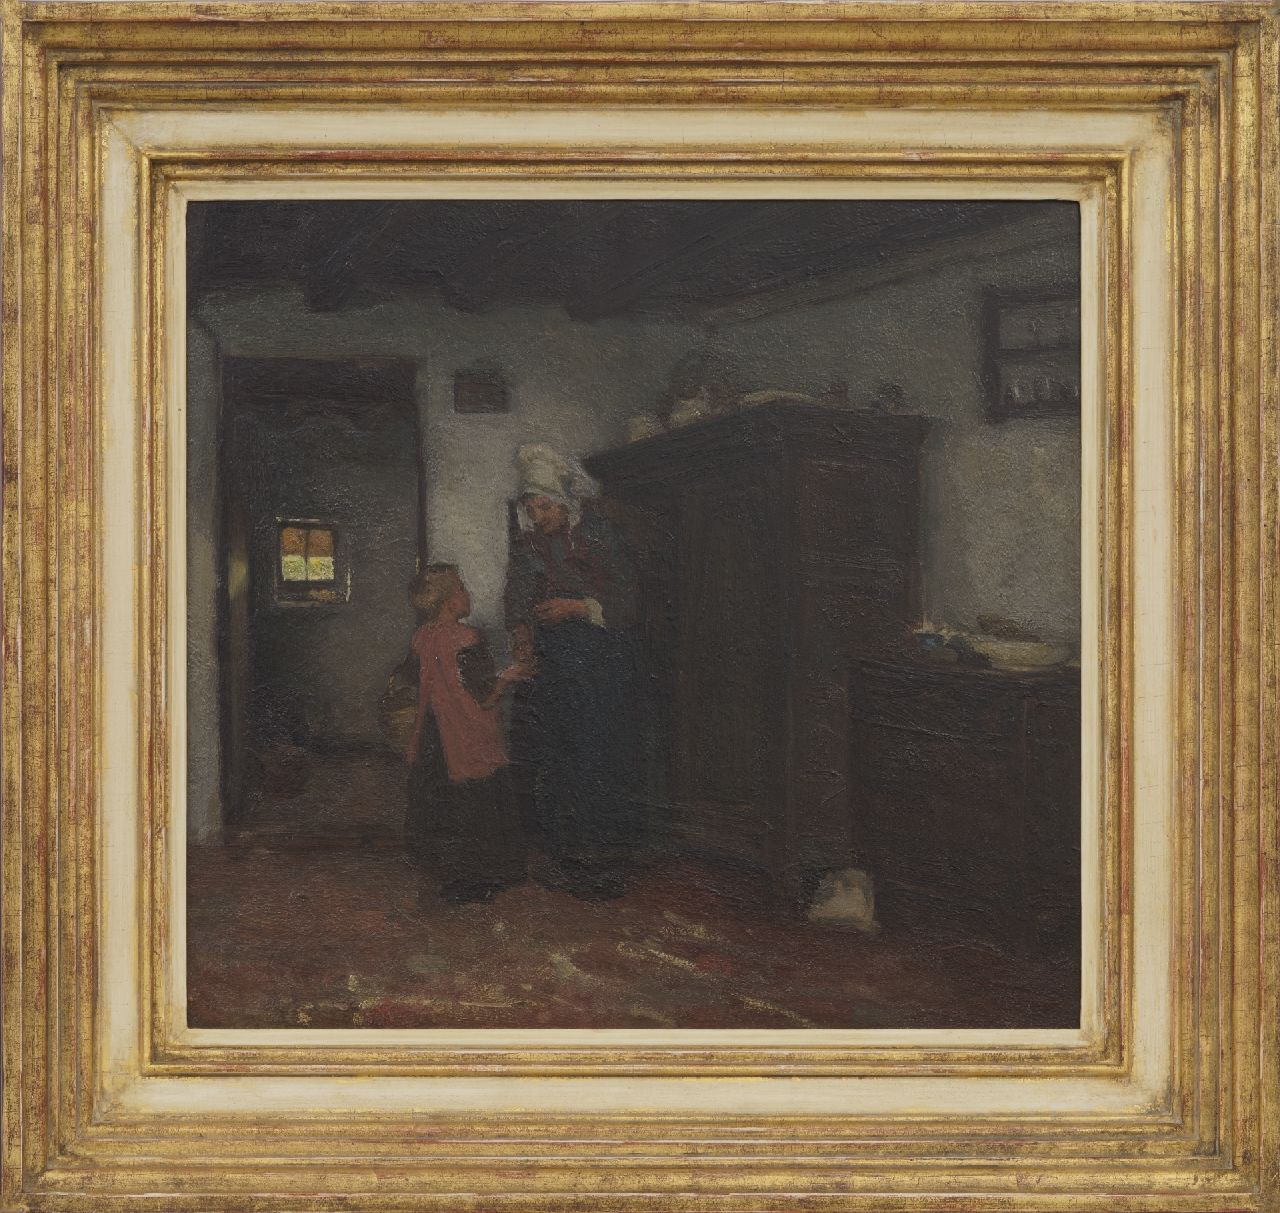 Neuhuys J.A.  | Johannes 'Albert' Neuhuys, A farm interior with a woman and child, oil on panel 40.4 x 43.7 cm, signed on a label on the reverse